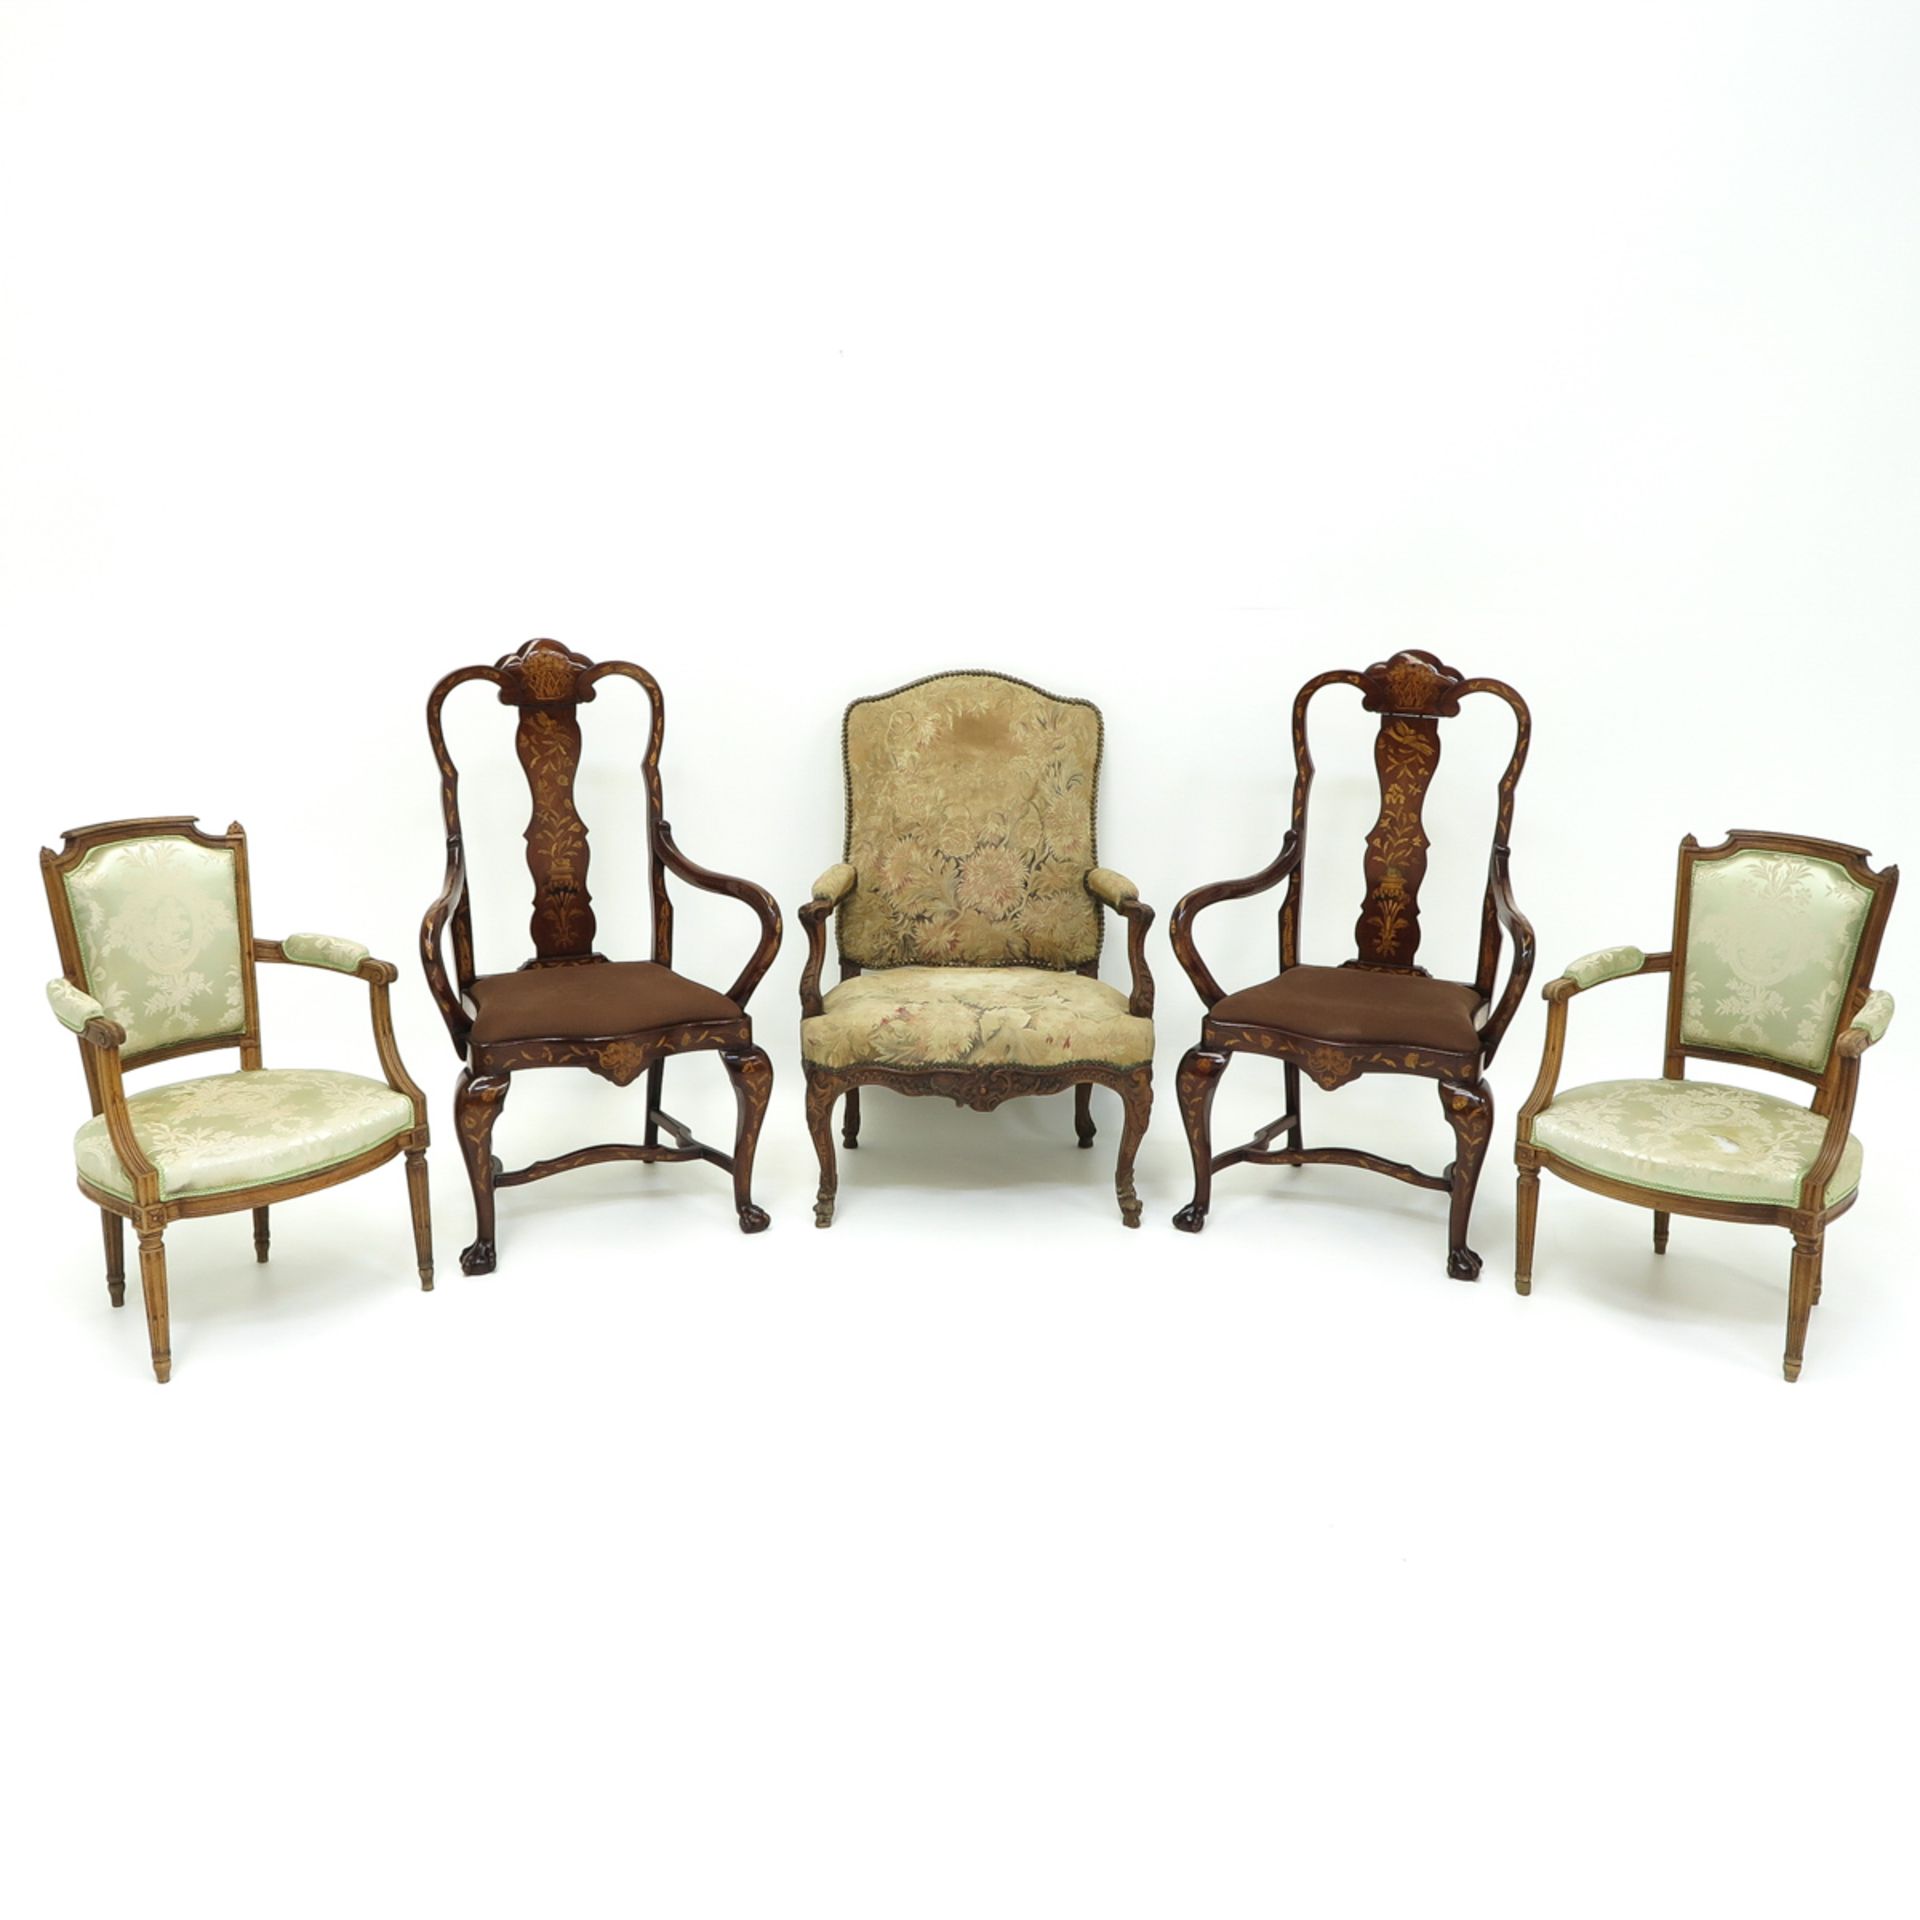 A Lot of 5 Armchairs